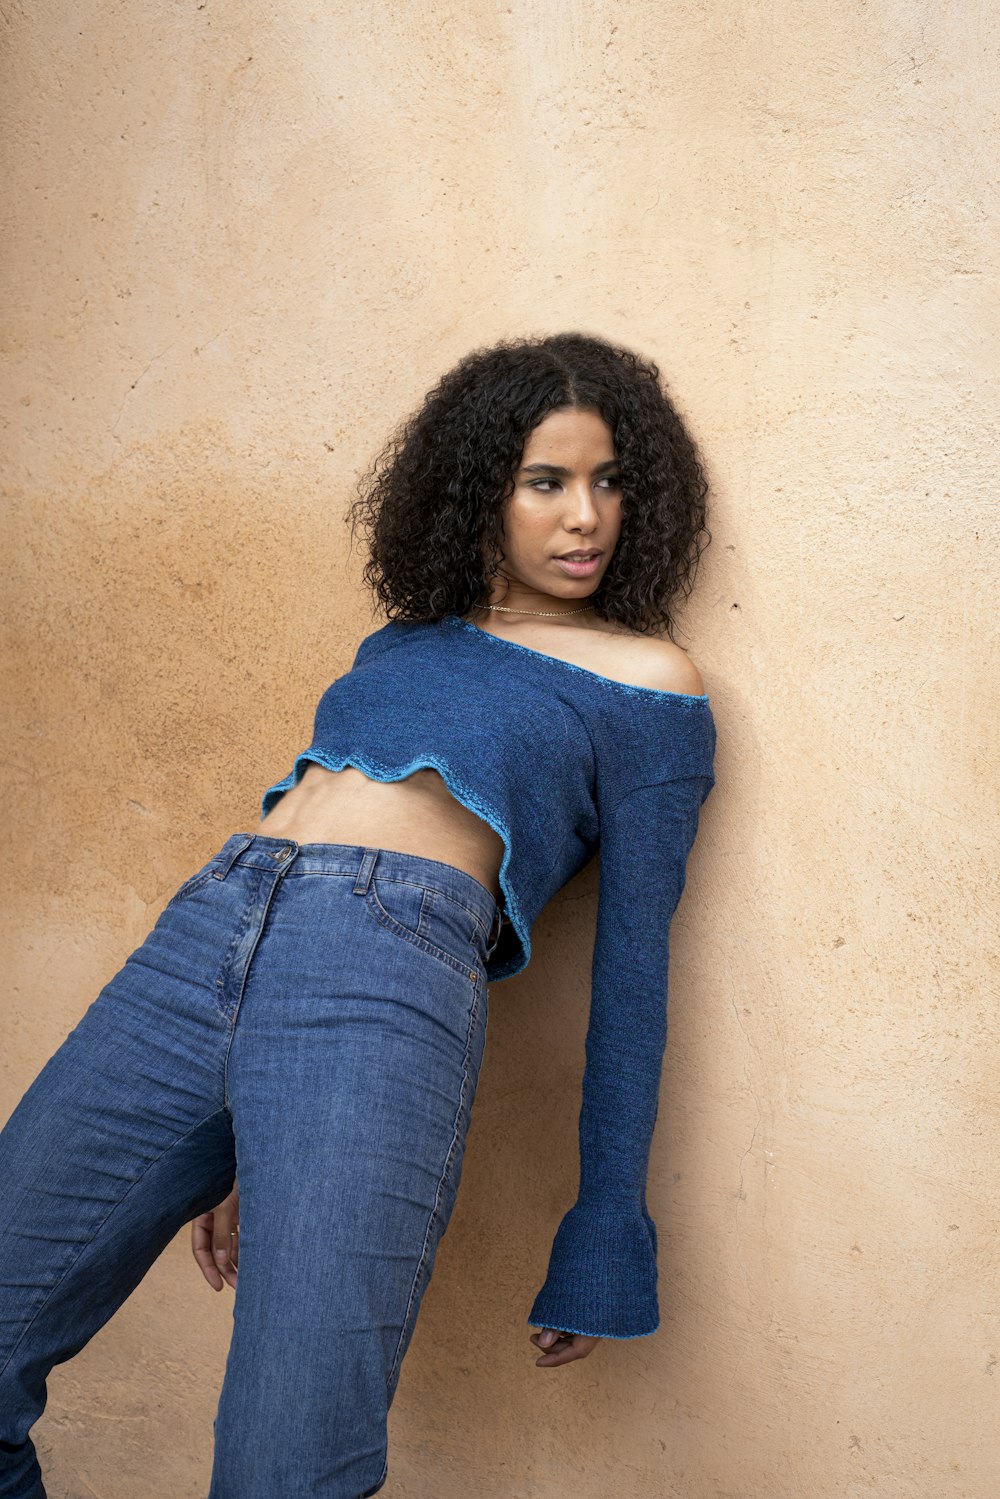 a woman leaning against a wall wearing a blue top